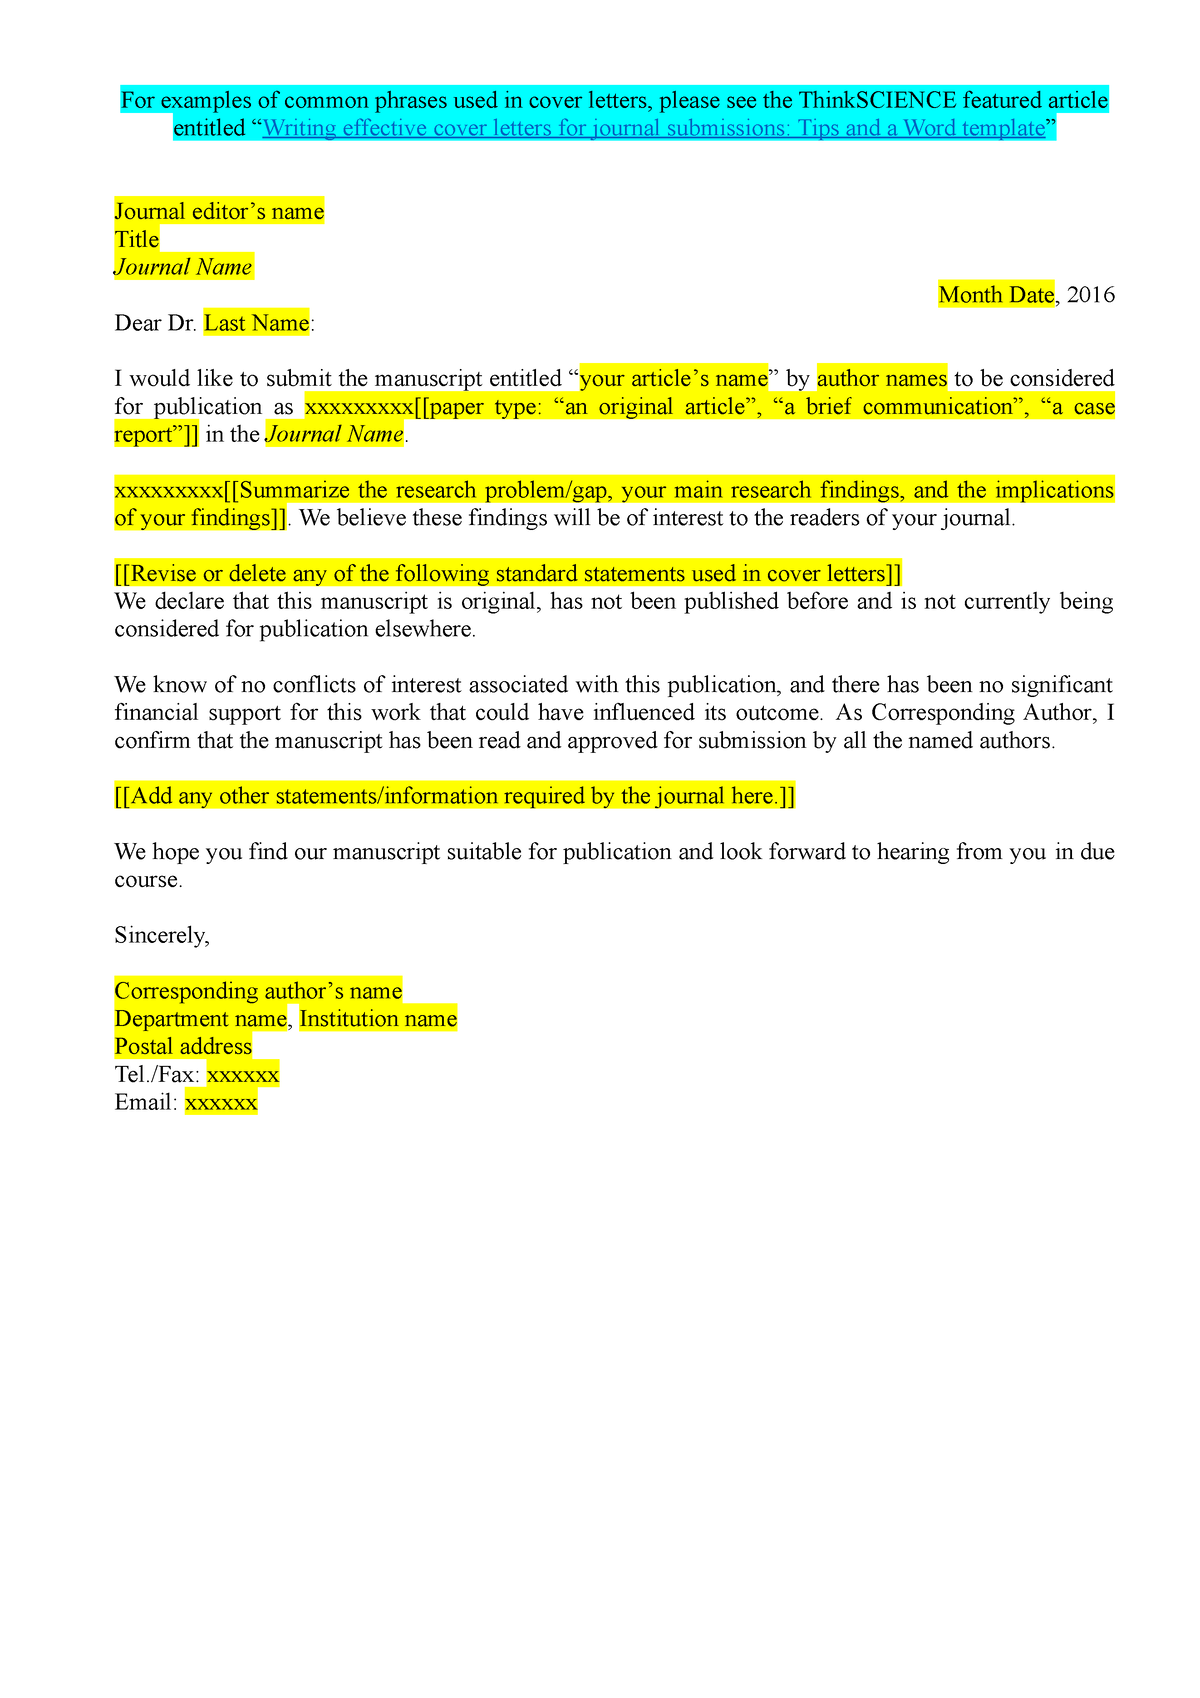 Journal Cover Letter Template-EN - For examples of common phrases used ...